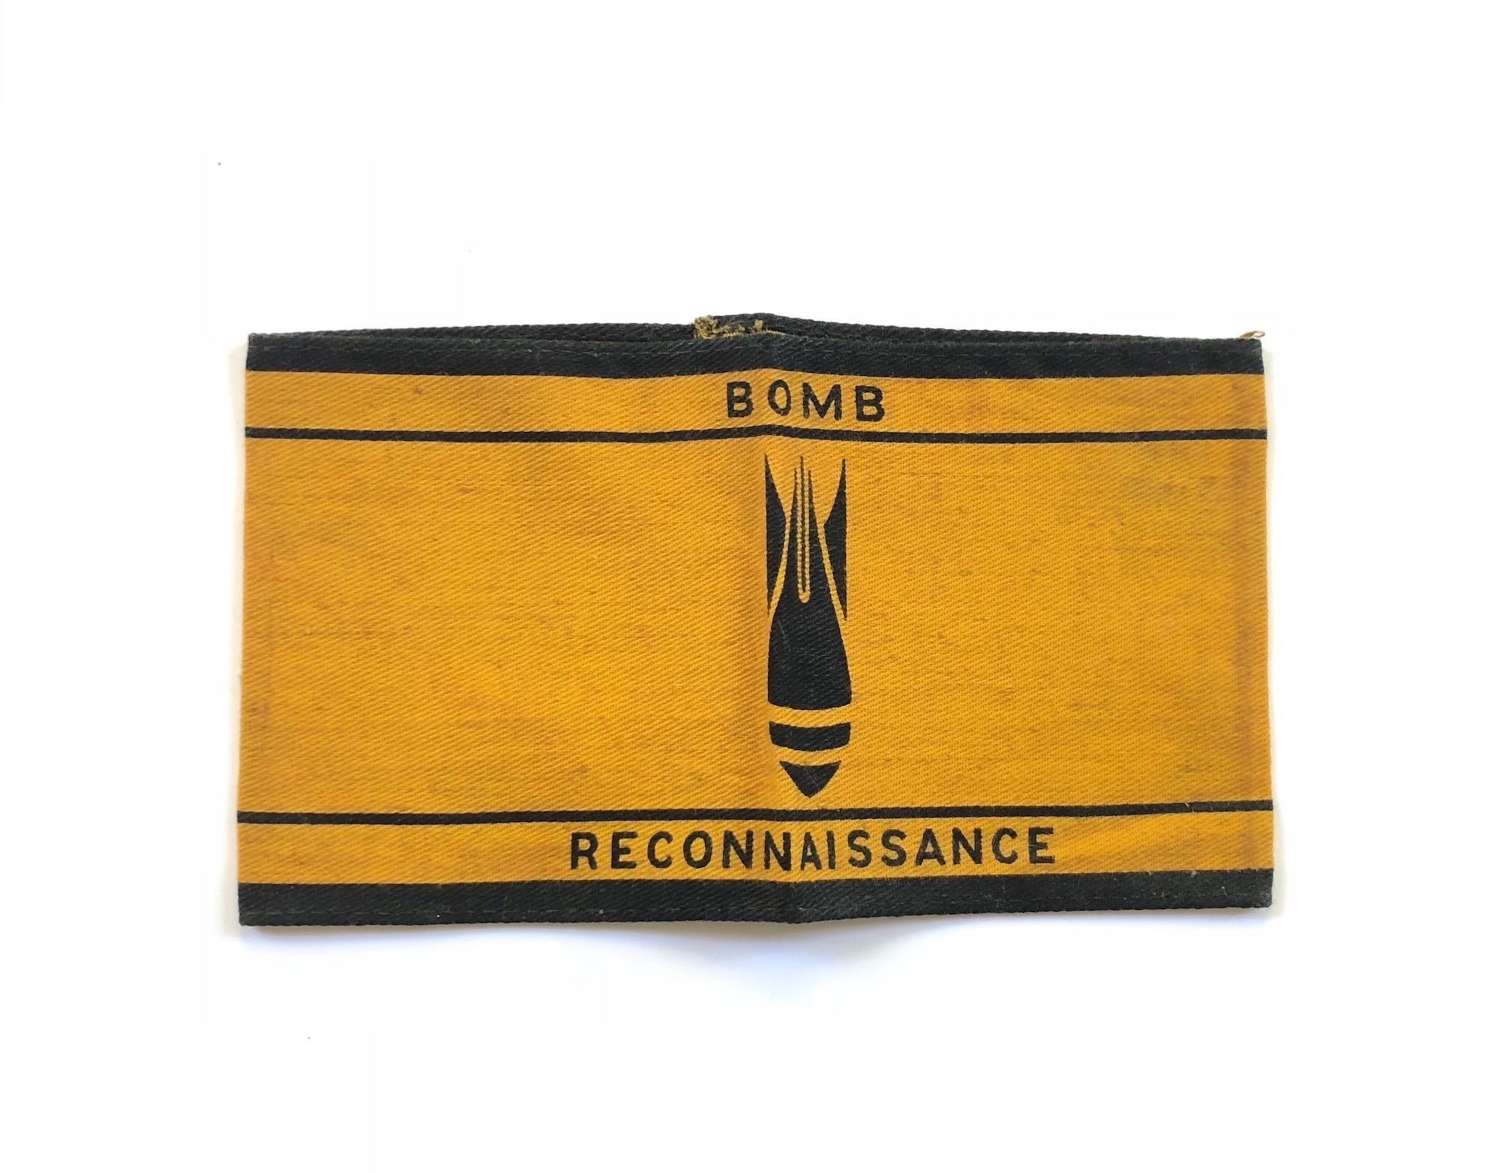 WW2 Home Front ARP Printed Bomb Reconnaissance Armband.